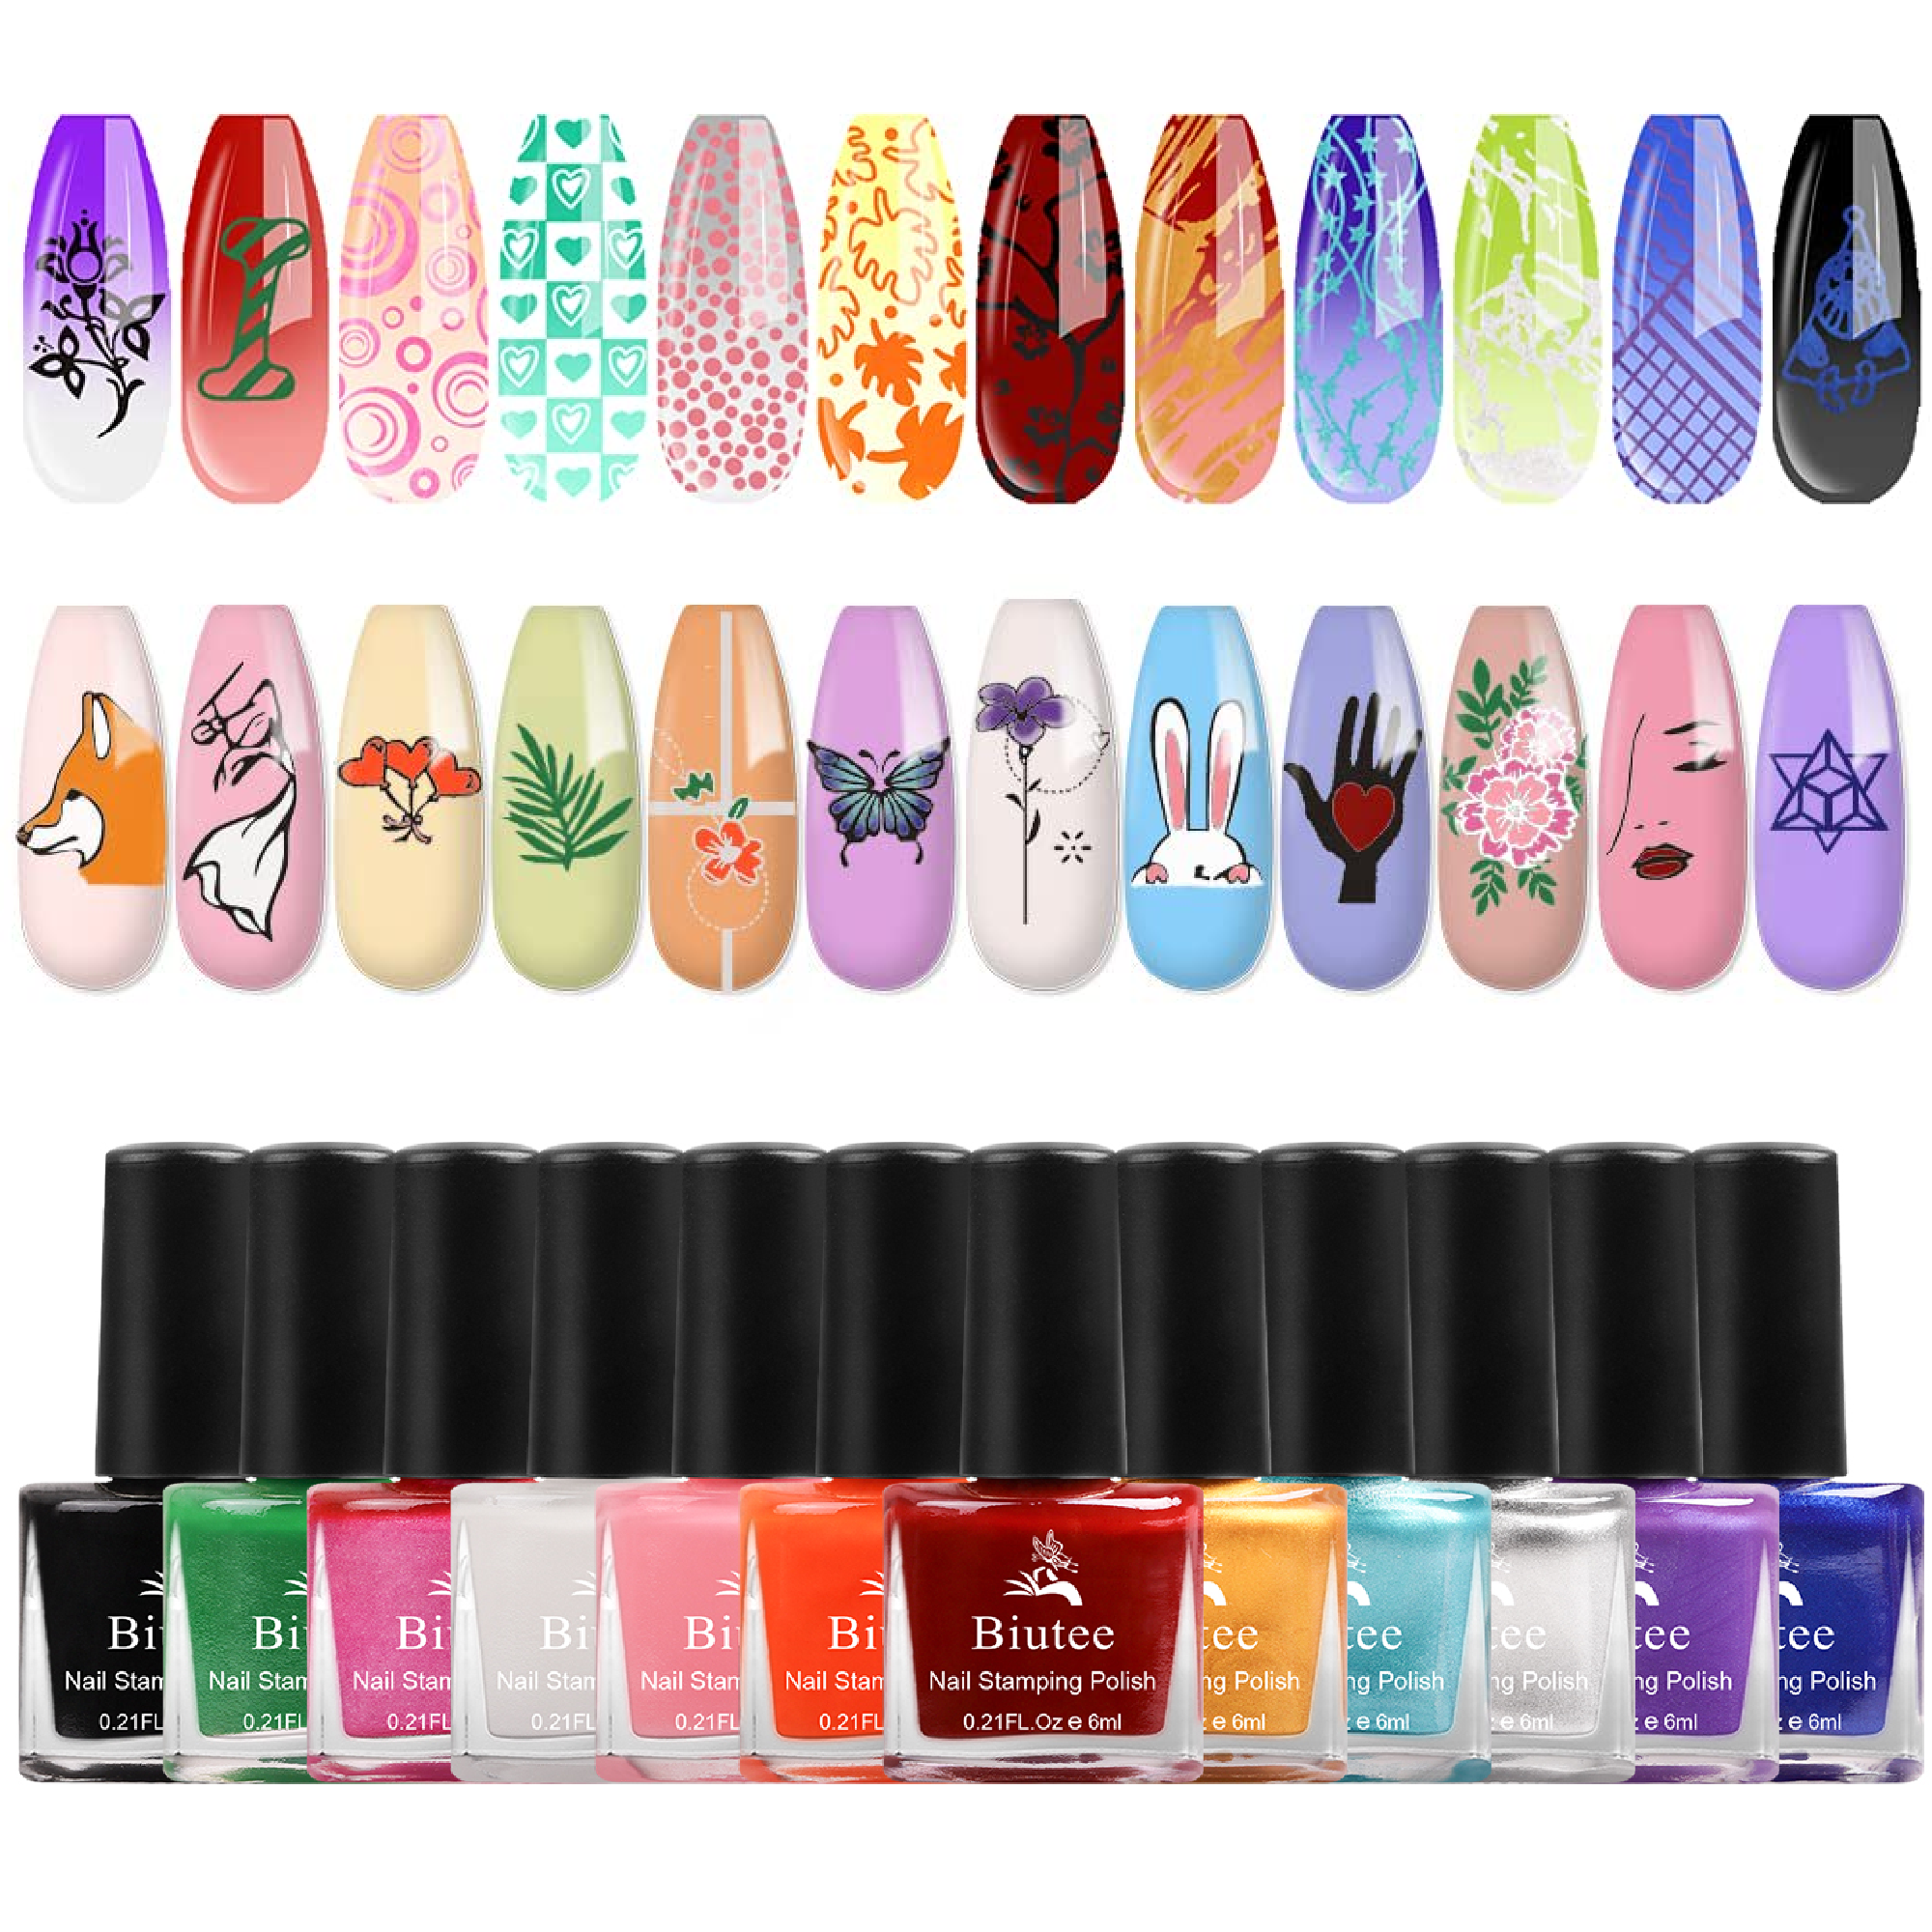 Buy MI FASHION Nail Polish, Glossy Finish, Vanilla Nude, 12ml (Pack Of 1)  Online at Low Prices in India 